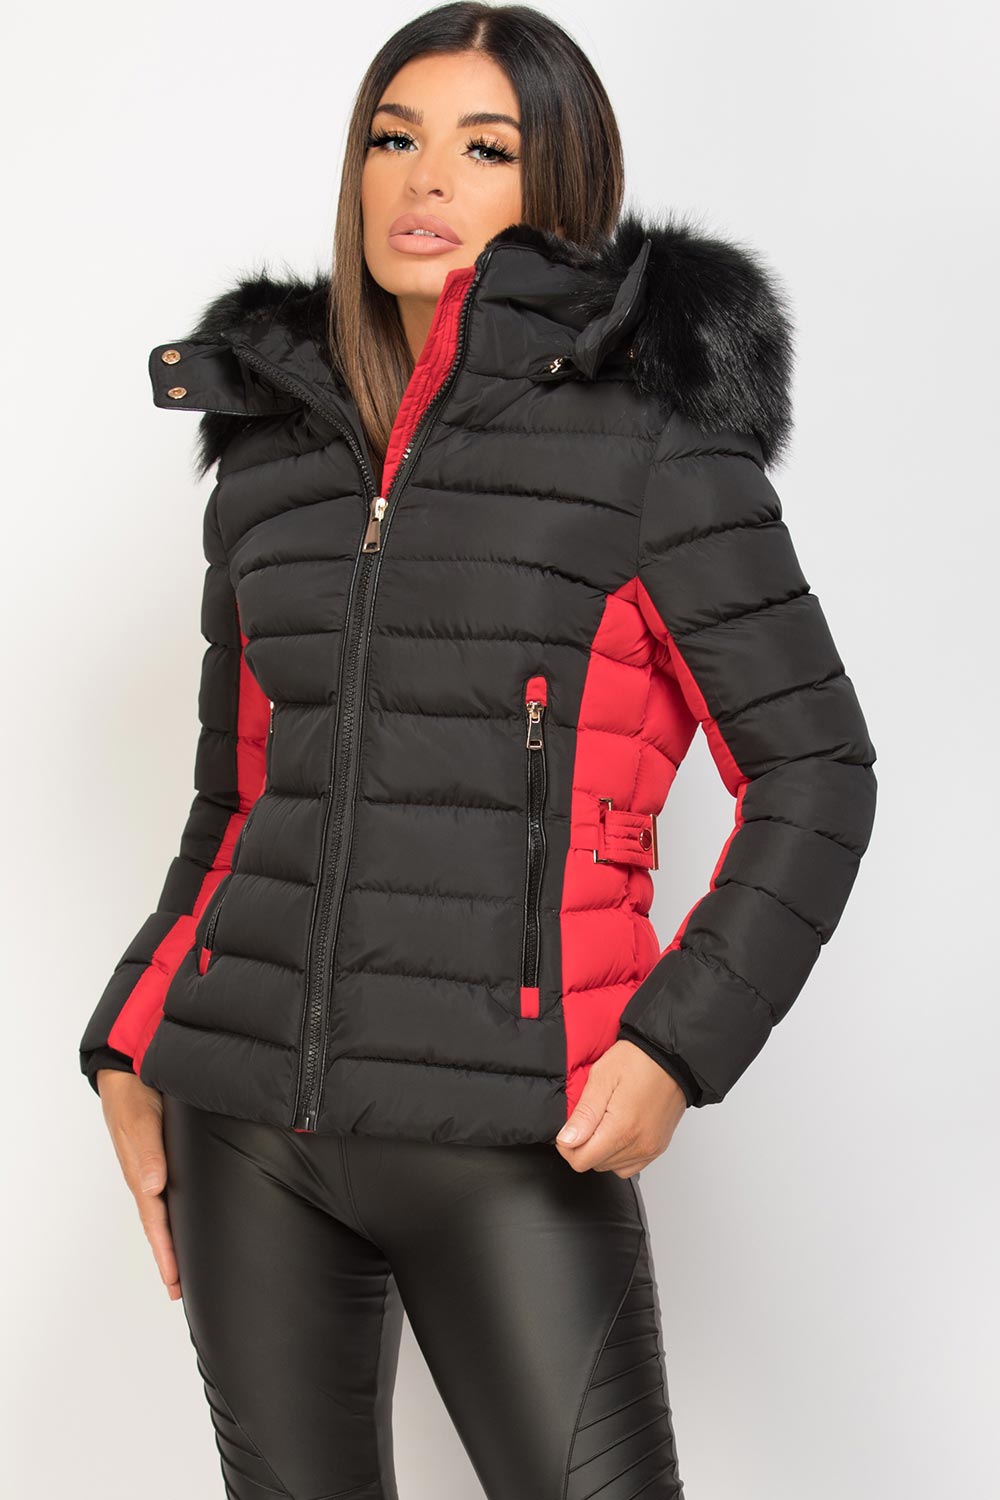 red and black puffer jacket with faux fur hood 